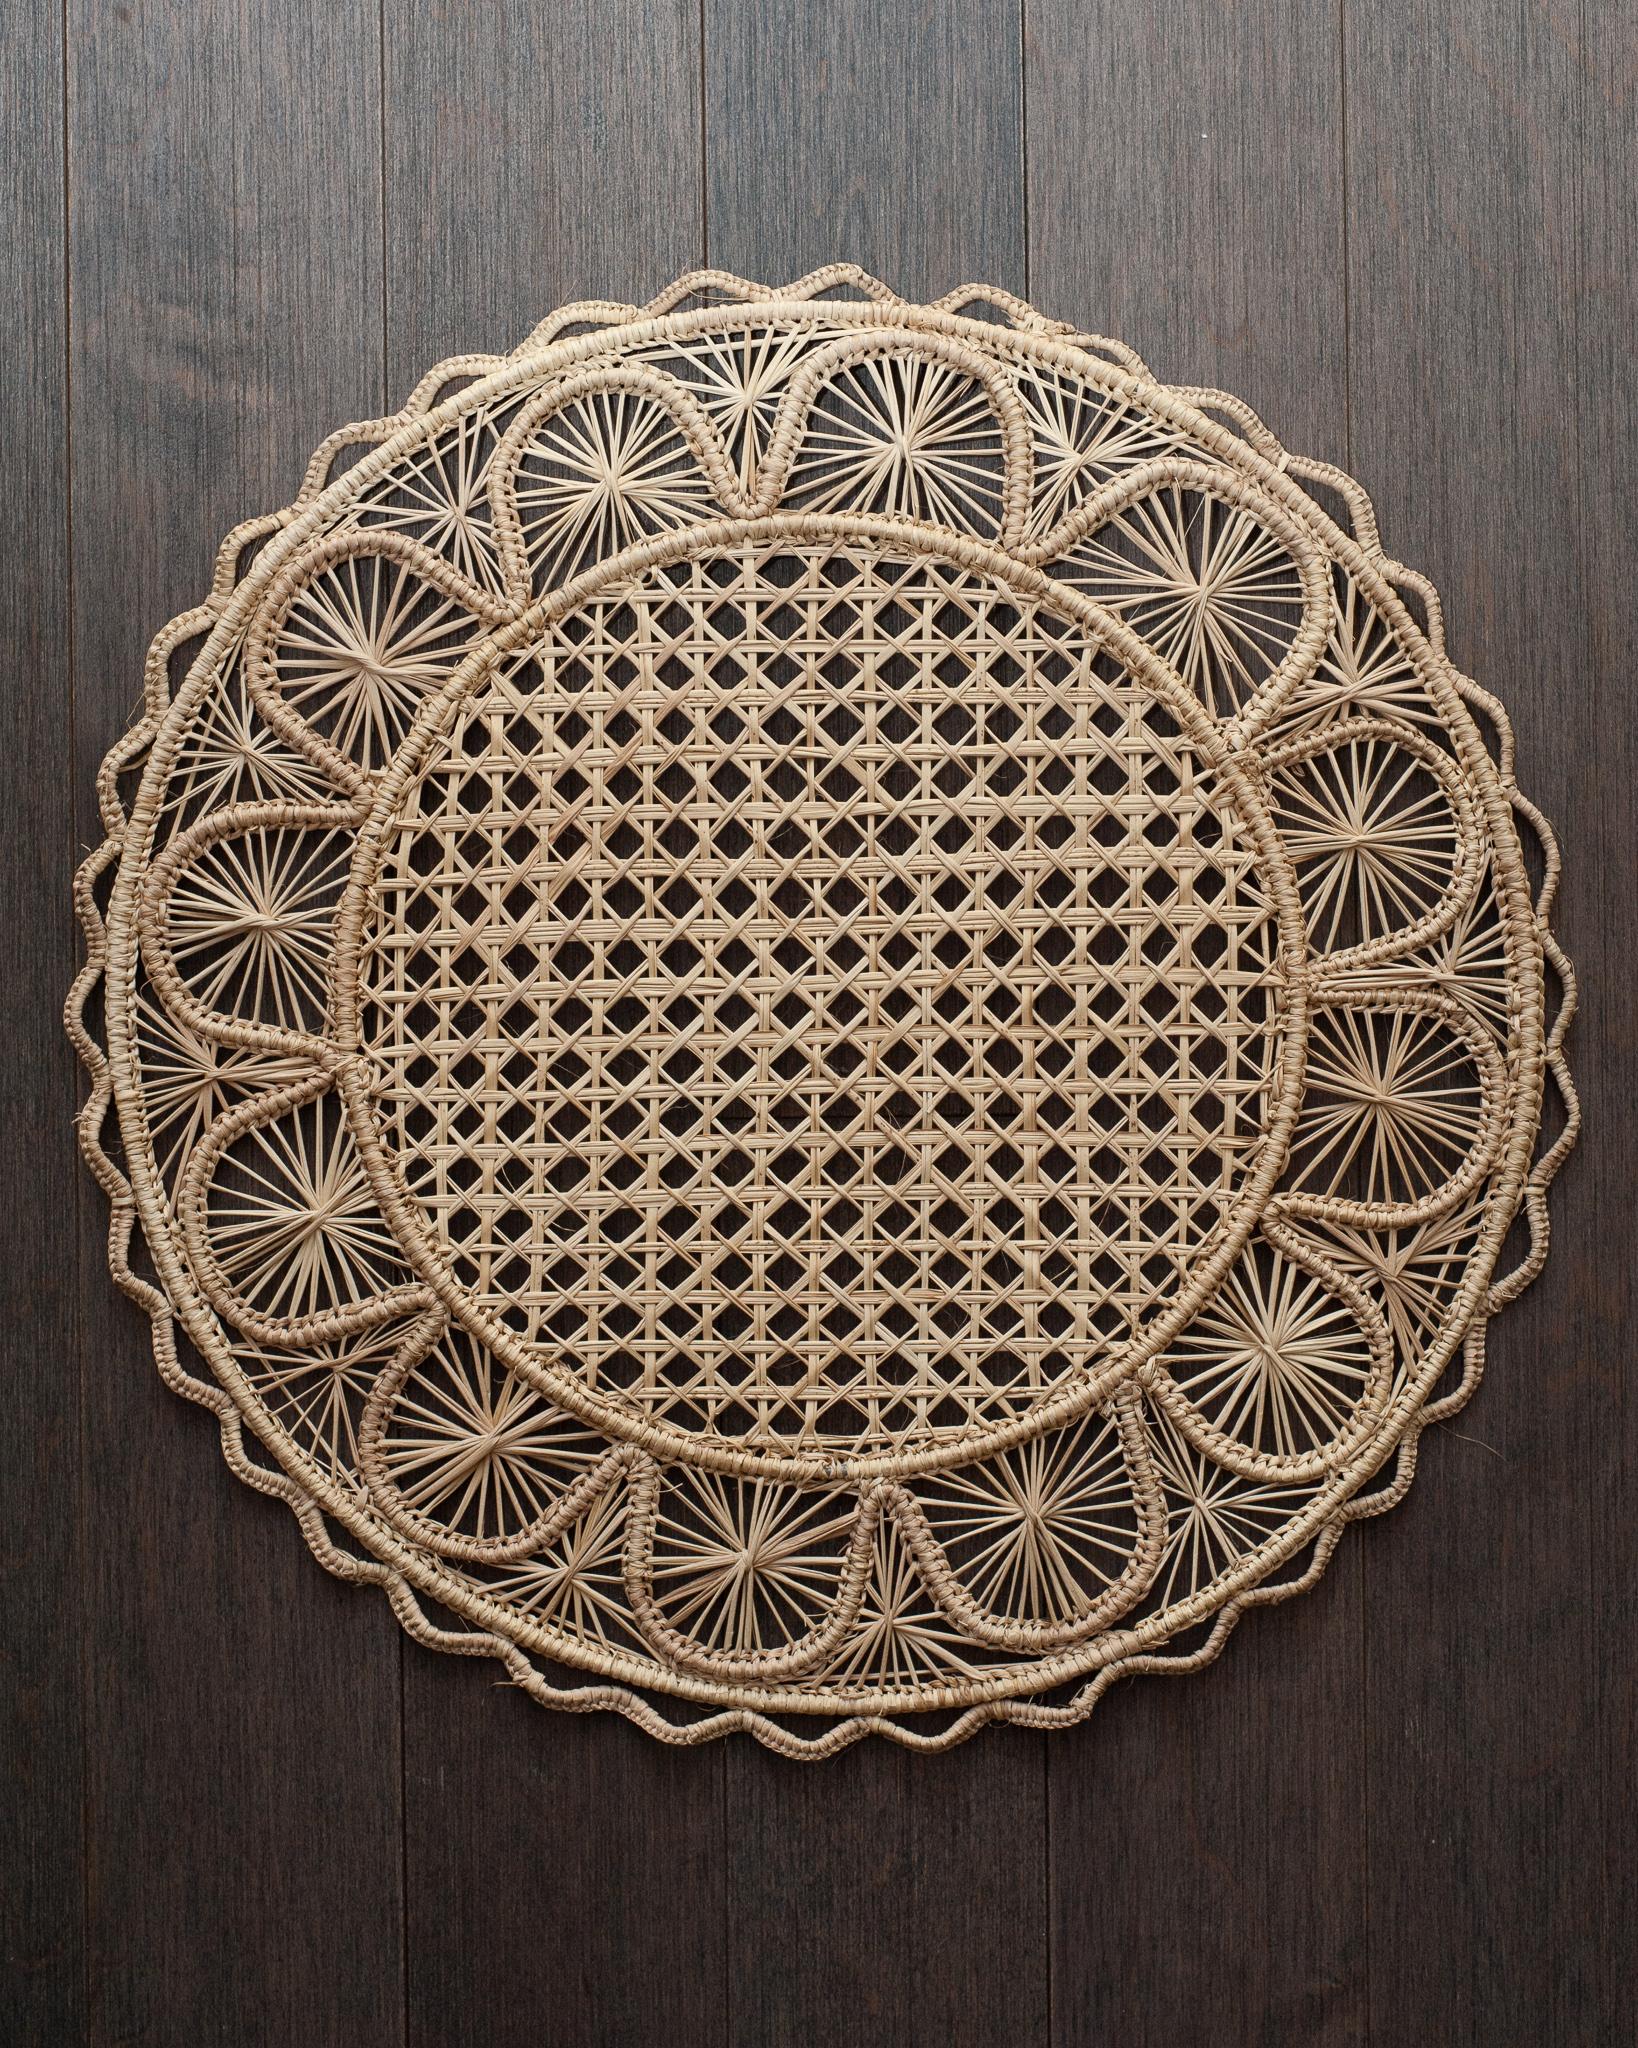 Uplift your table with these stunning handwoven rattan placemats in natural rattan. Finely crafted by expert artisans, these pieces all showcase the classical technique of weaving in a modern way. From Jean Michel Frank to the House of Dior, rattan